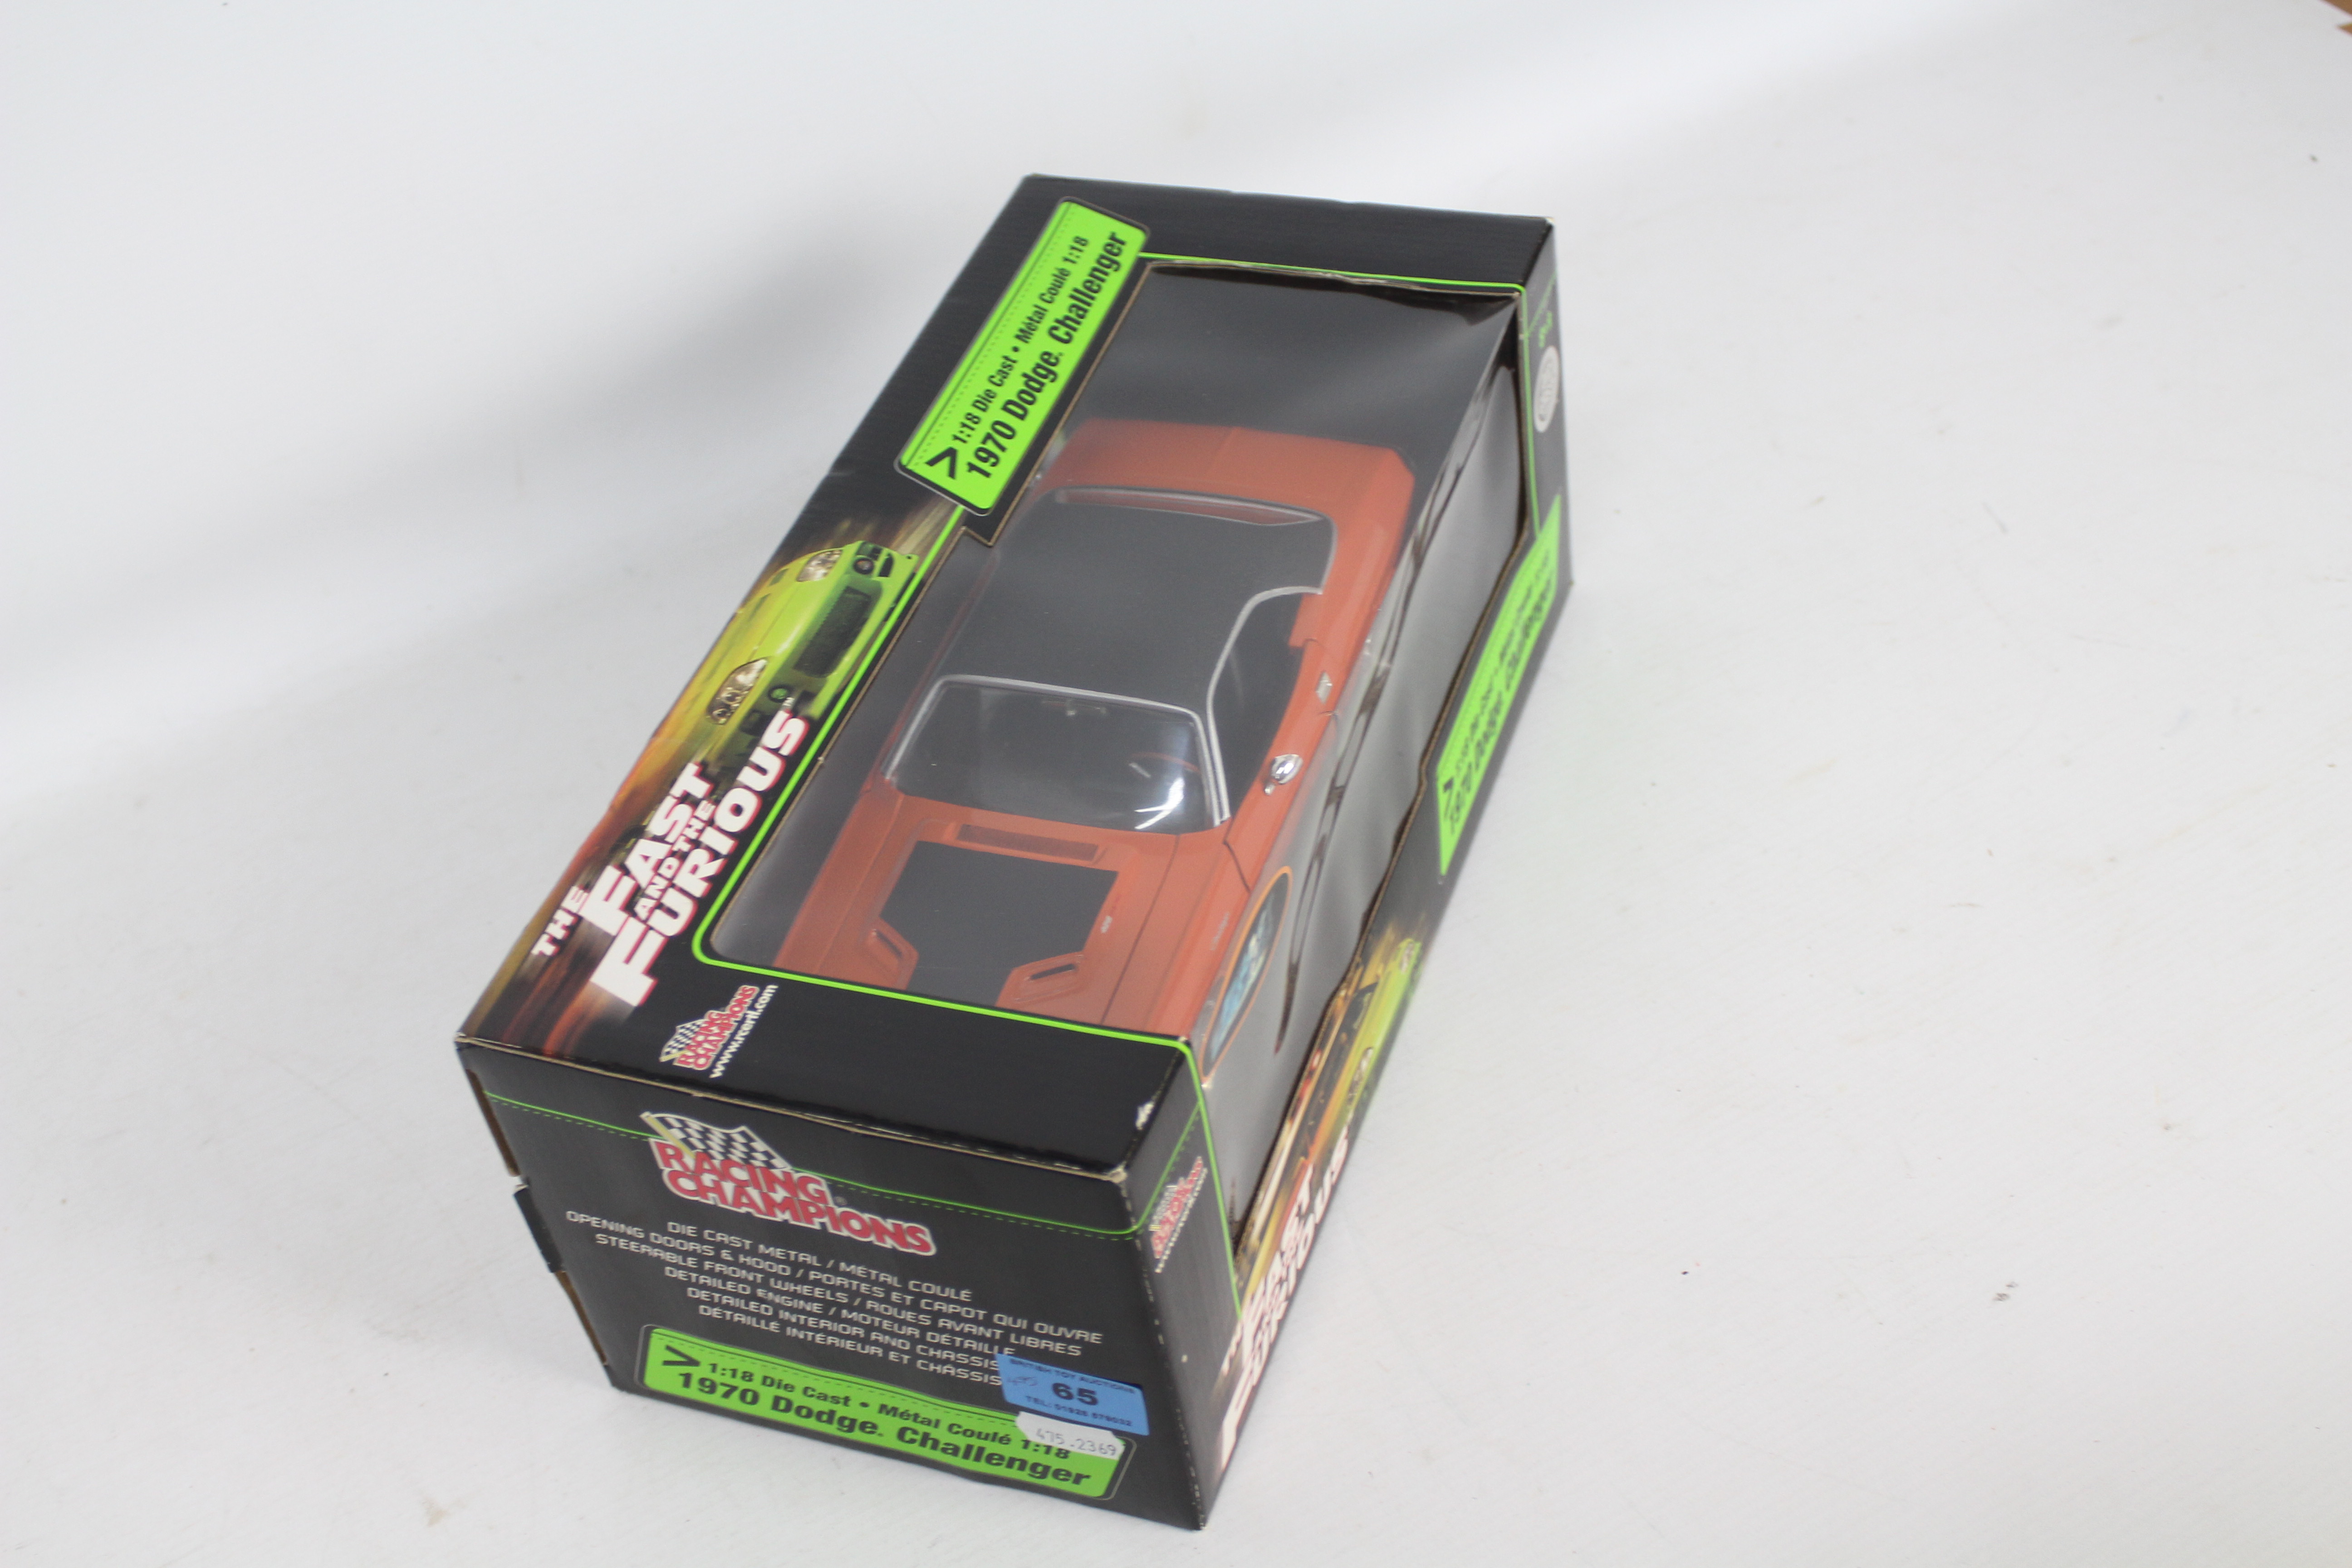 Racing Champions / Ertl - A boxed 1:18 scale 'Fast & Furious' diecast 1970 Dodge Challenger. - Image 2 of 3